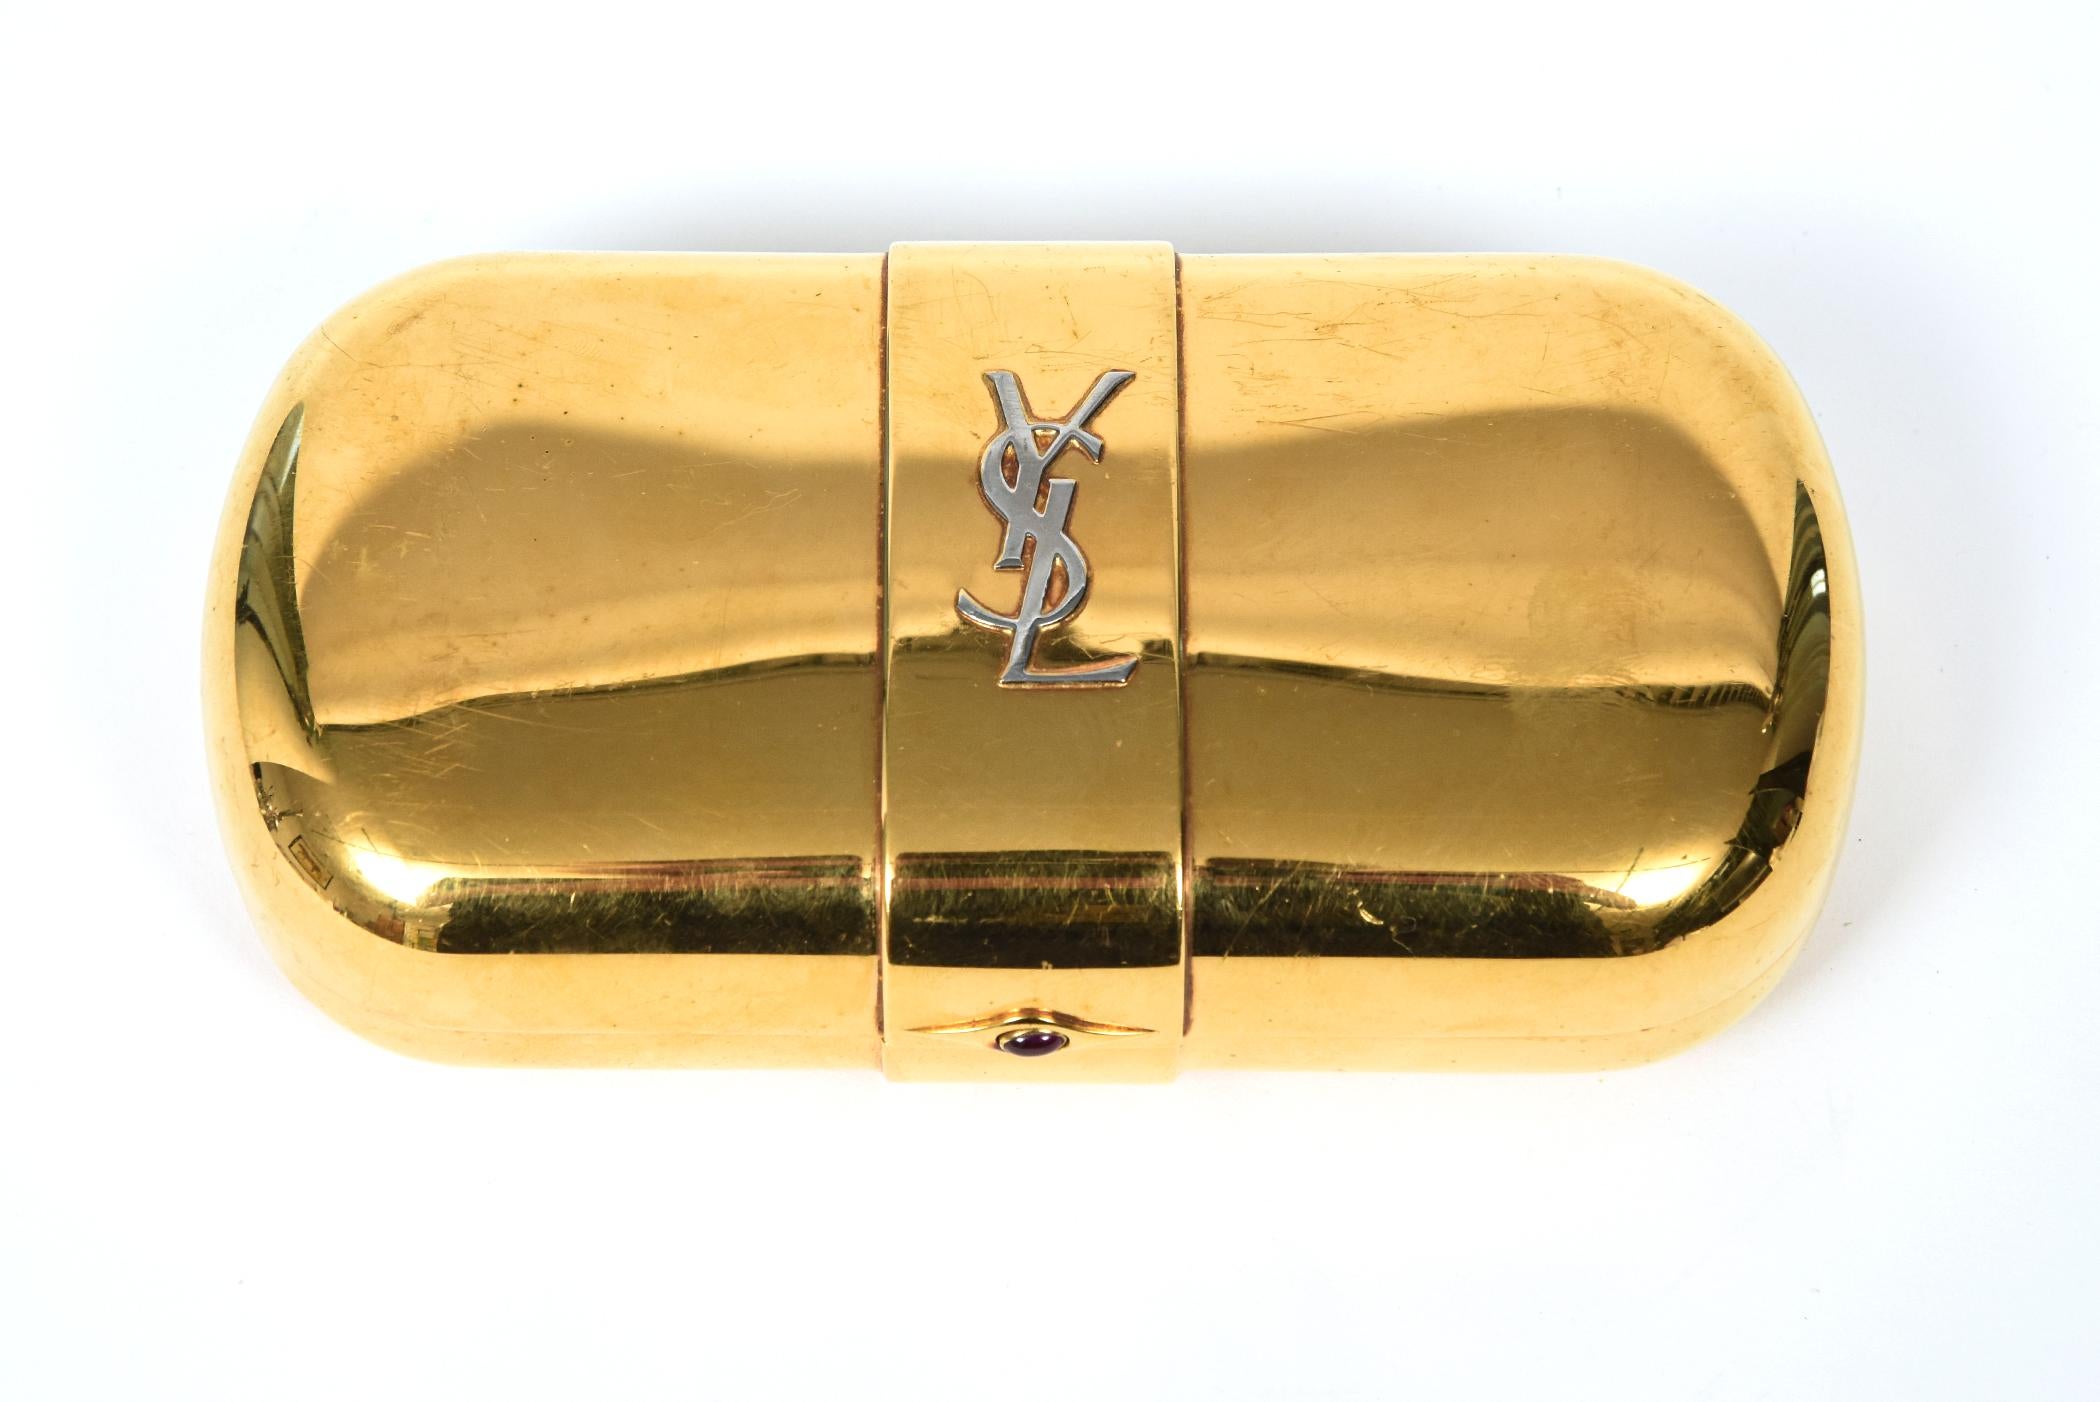 Vintage gold plated Yves Saint Laurent clutch is perfect for an evening out on the town.  From the 1980s, it features a gold metal exterior with a silver YSL logo in the center.  The inside is a burgundy satin moire interior with a small pocket. 